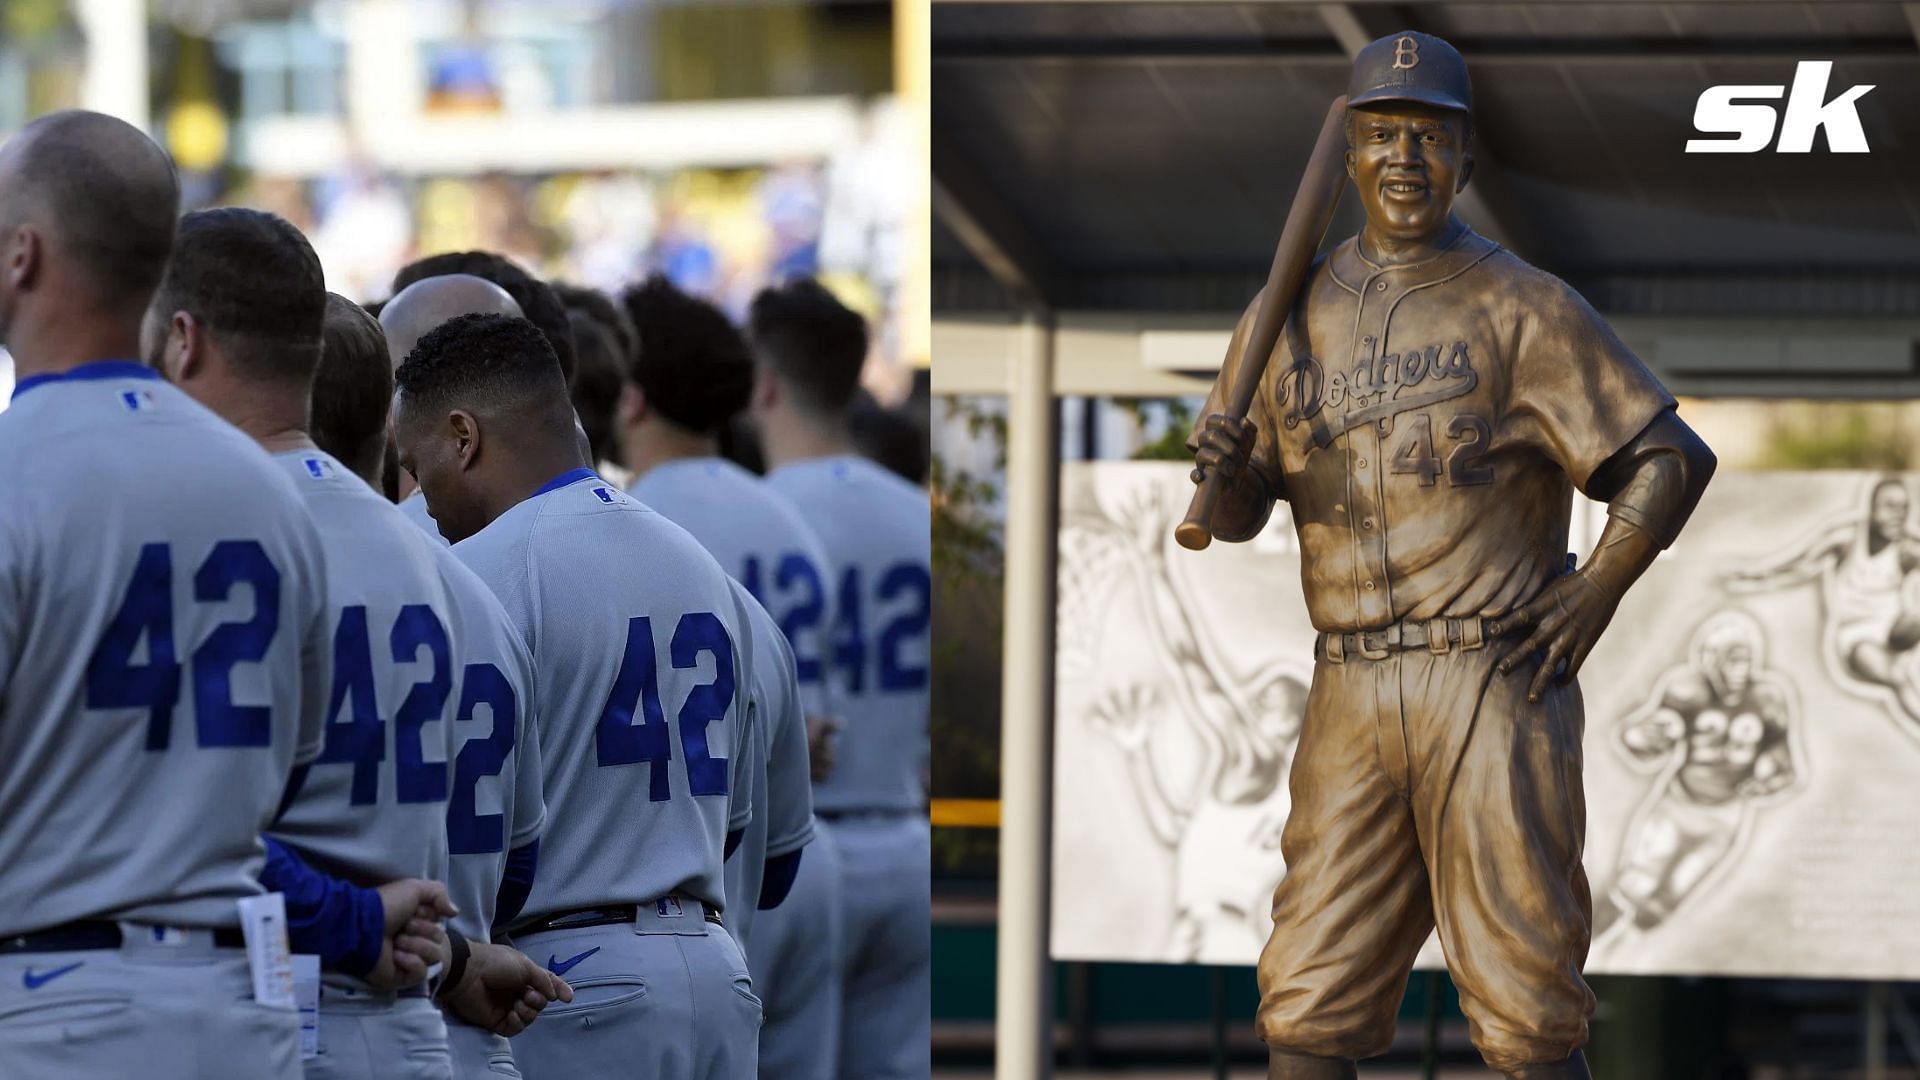 A Jackie Robinson statue was stolen from a youth baseball field in Wichita, Kansas on Thursday